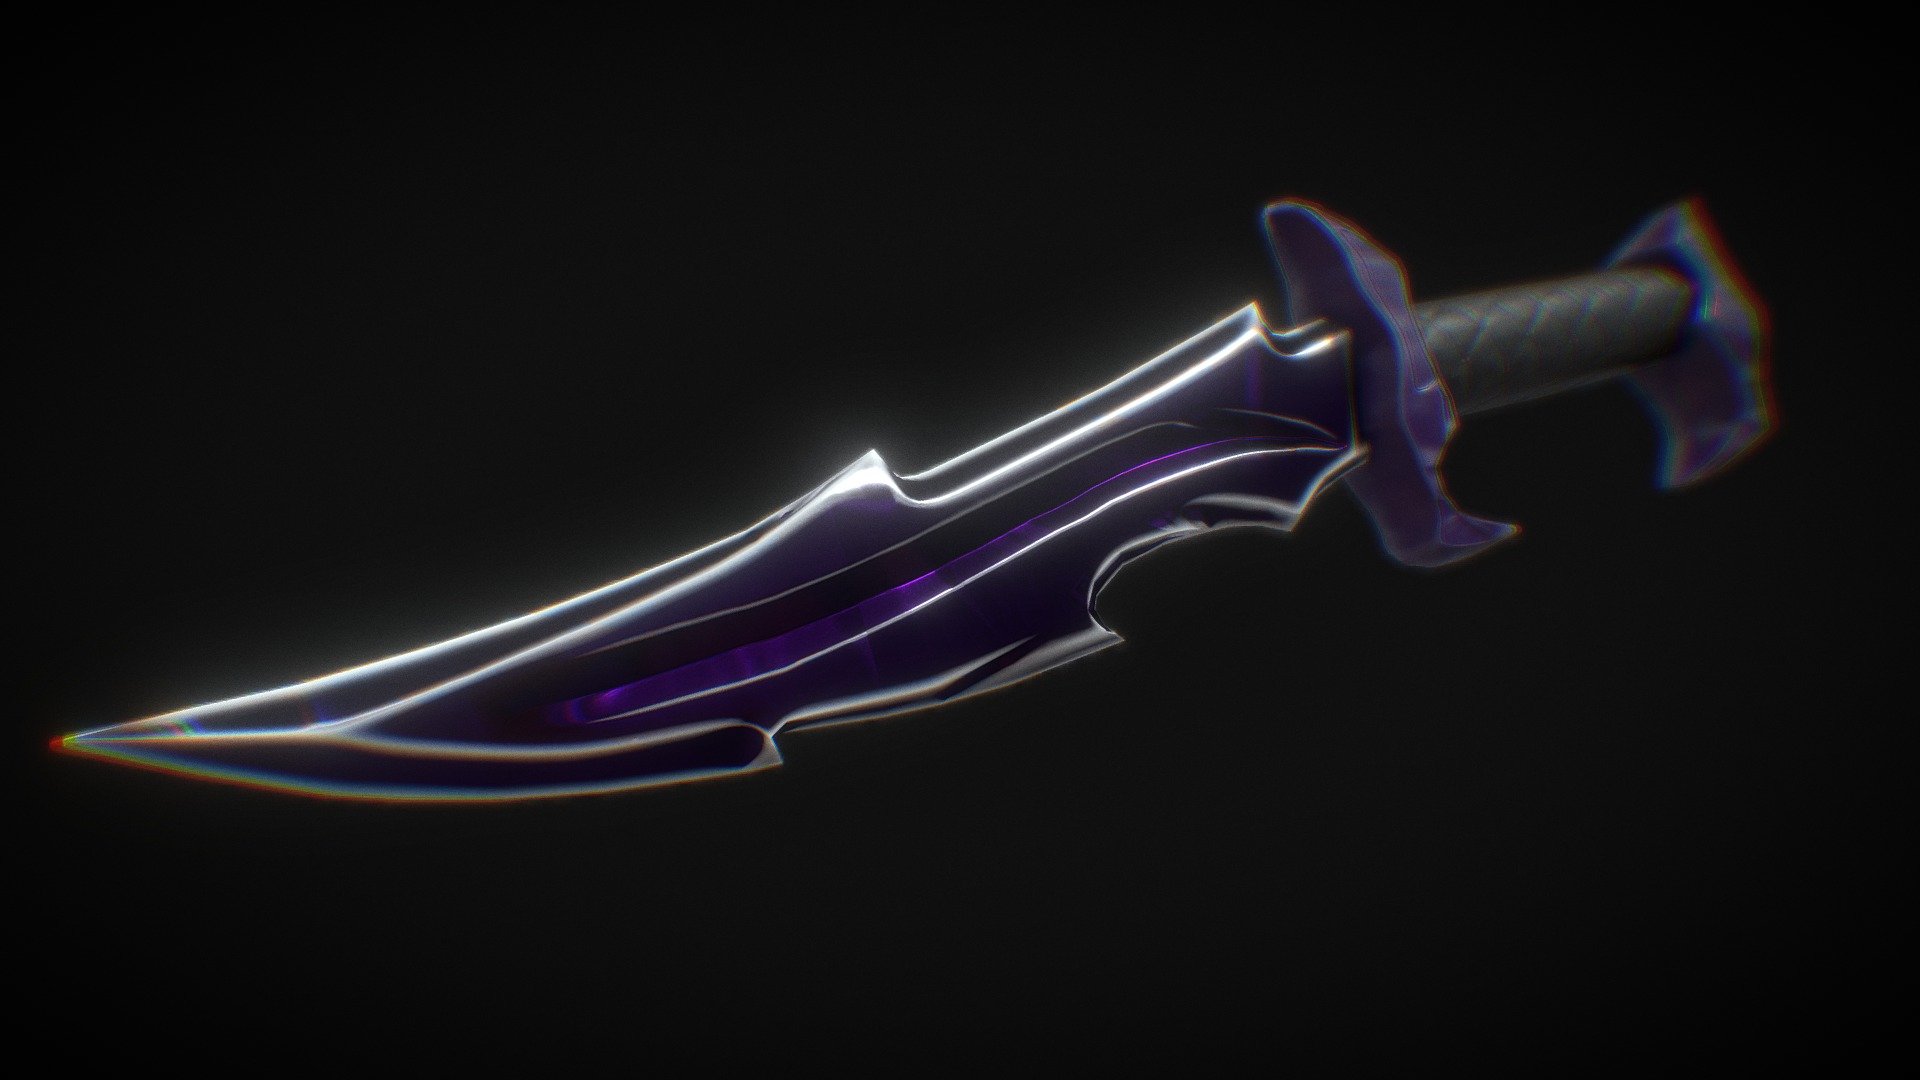 Reaver Knife Low Poly inspired from a game called Valorant 3d model